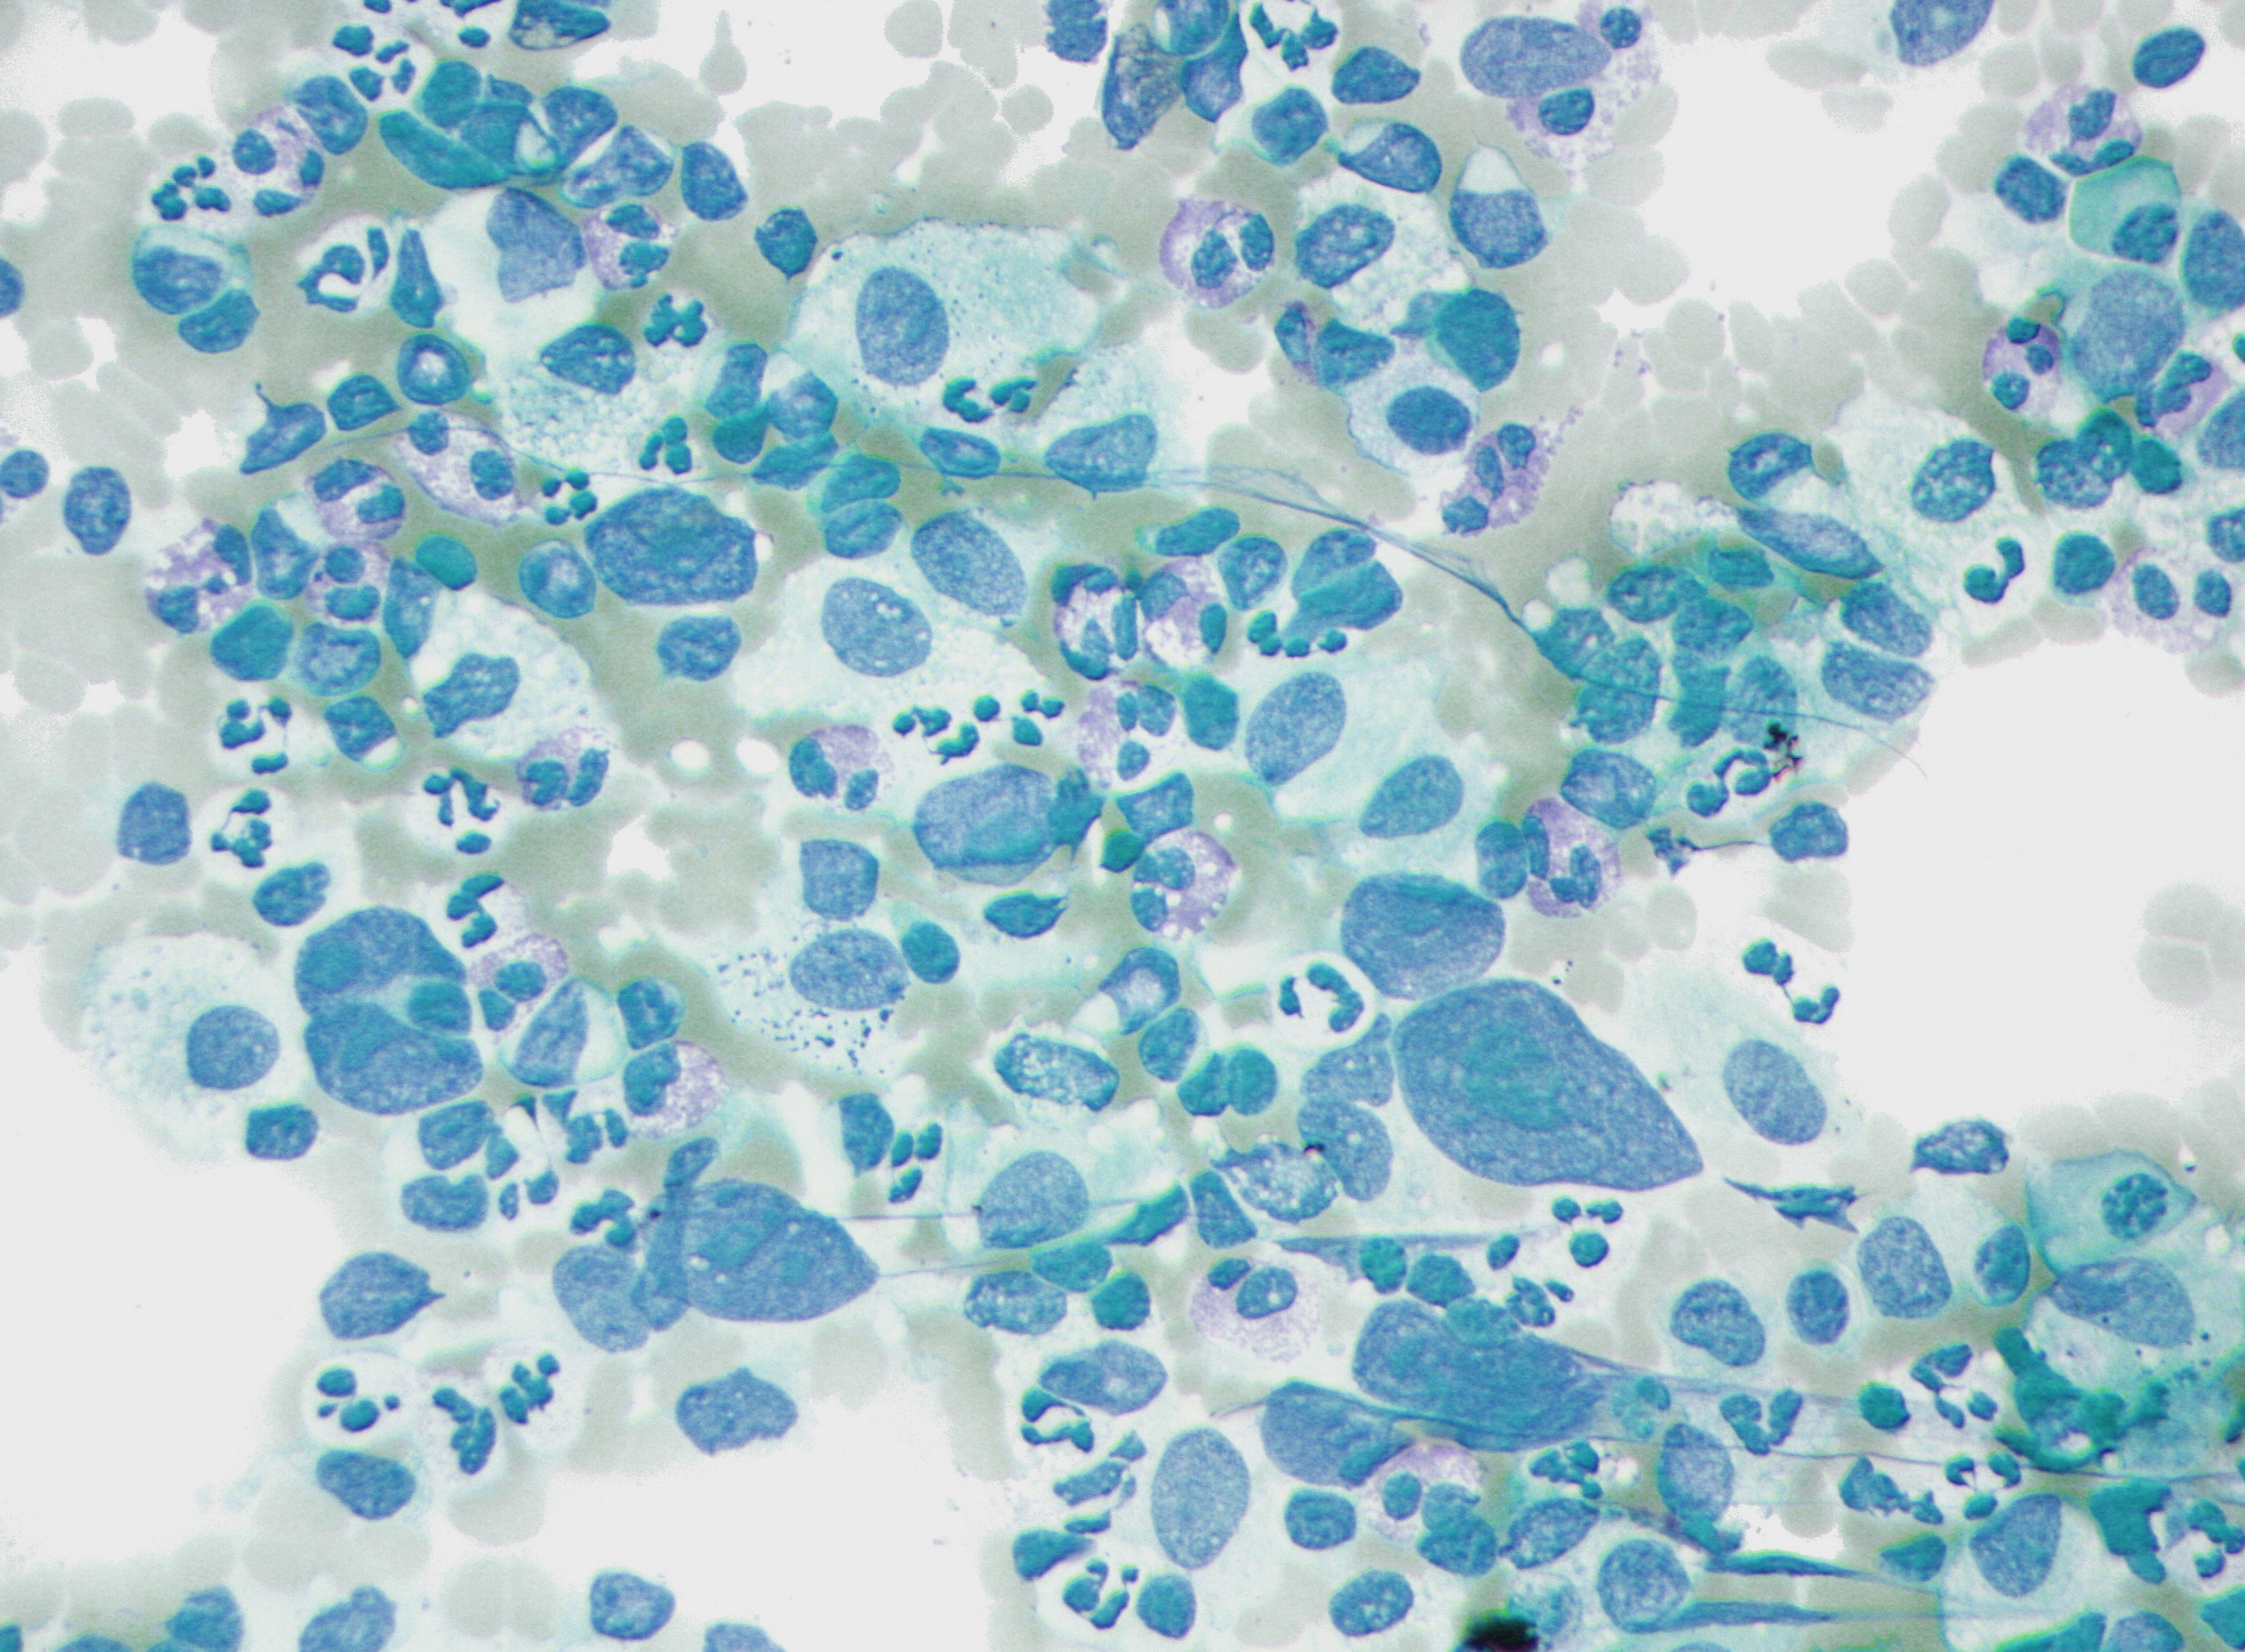 Microscope image showing a mixture of cells common in Hodgkin's lymphoma